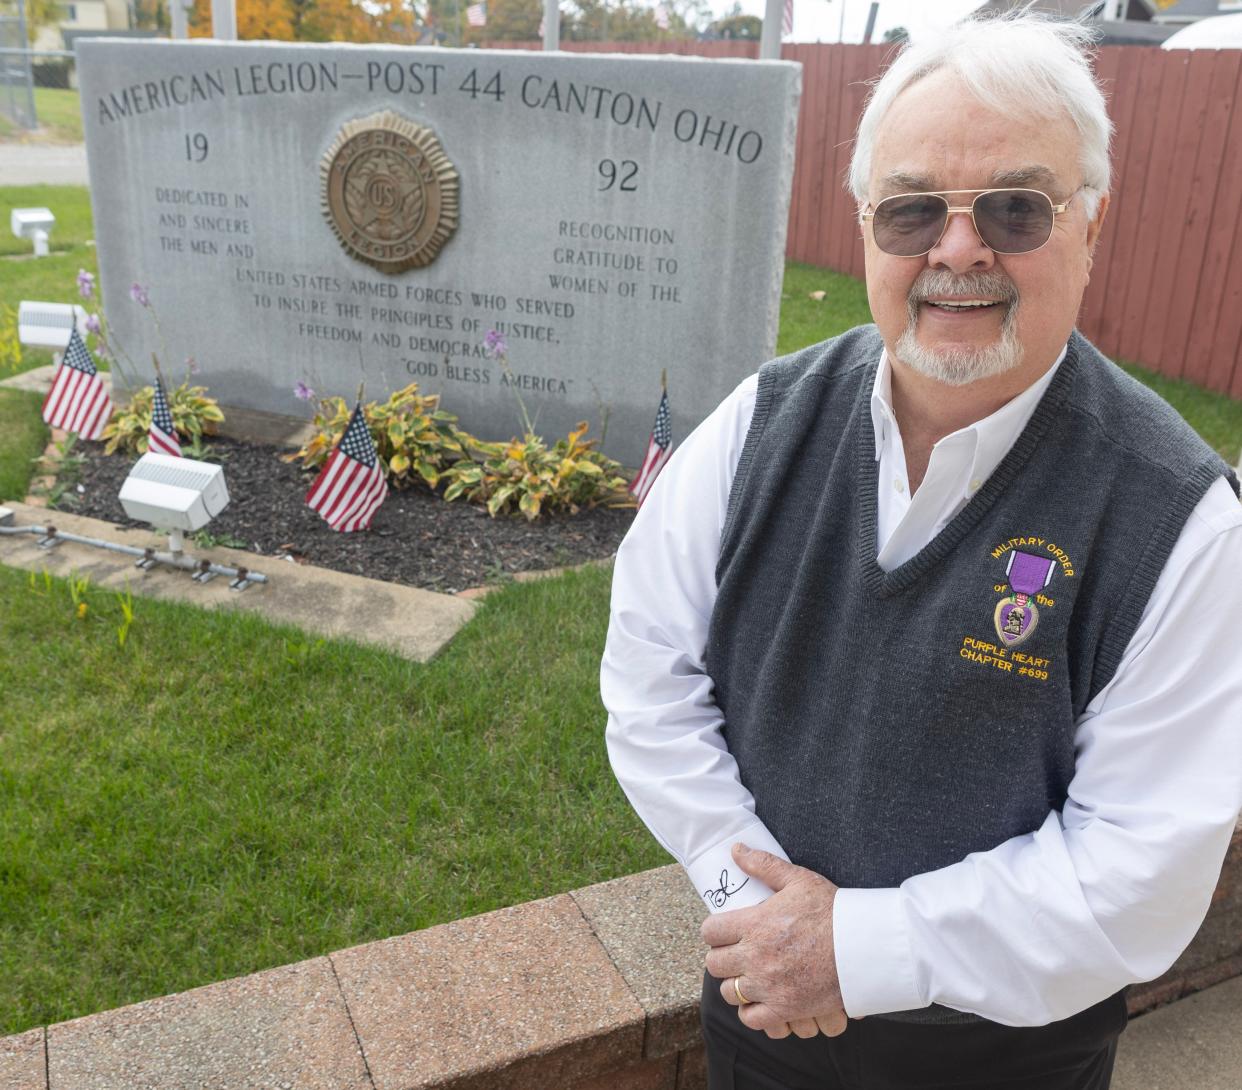 William "Bill" Theiss, 77, has been tapped as the Stark County Veteran of the Year by the Greater Canton Veterans Council. Theiss, who resides in Jackson Township, is a former U.S. Army captain who served from 1966 to 1970, including two overseas tours in the Vietnam War.